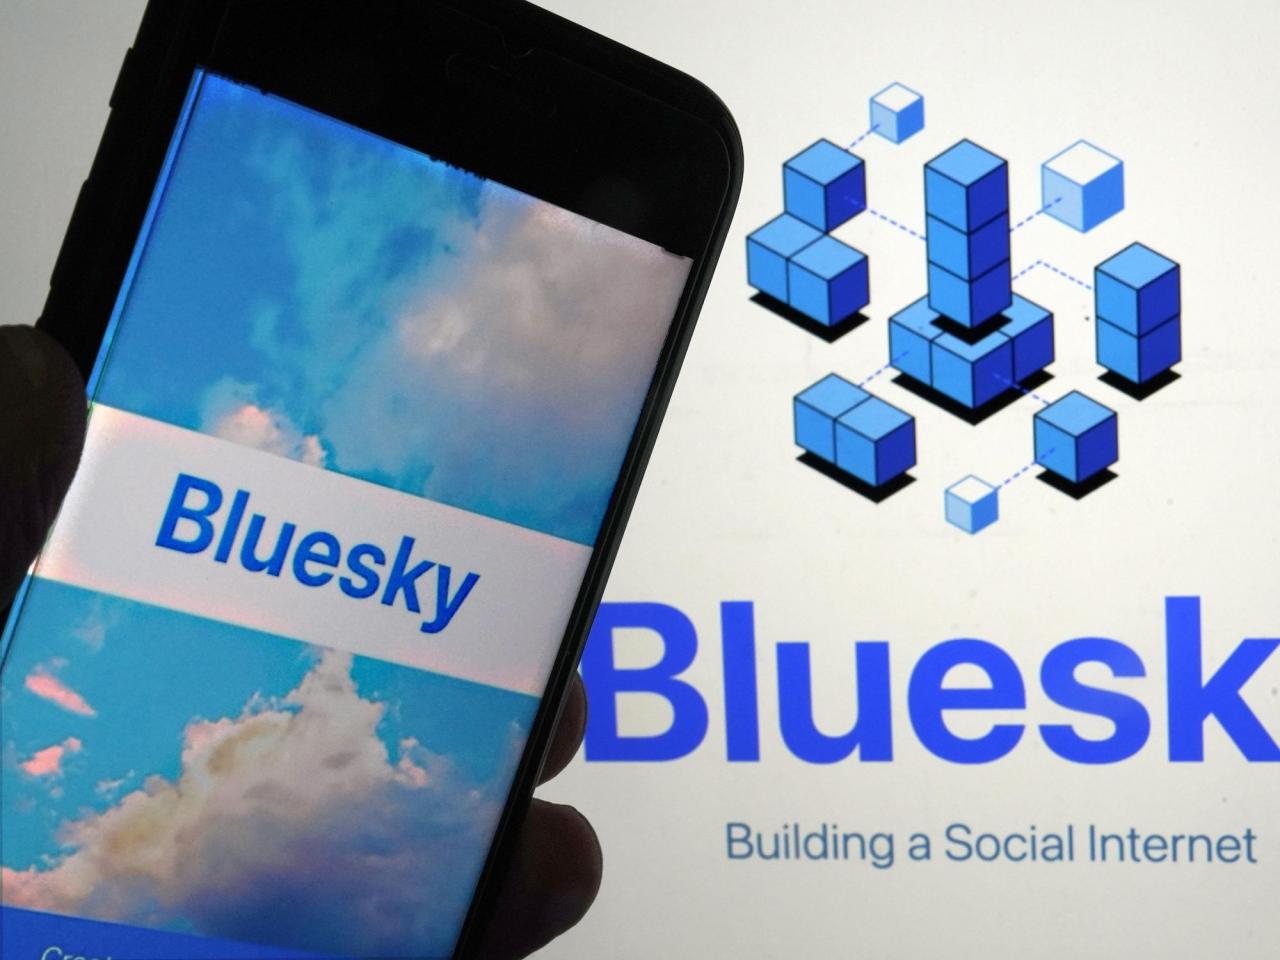 Bluesky, a social networking platform supported by Jack Dorsey, is now available for anyone to register.